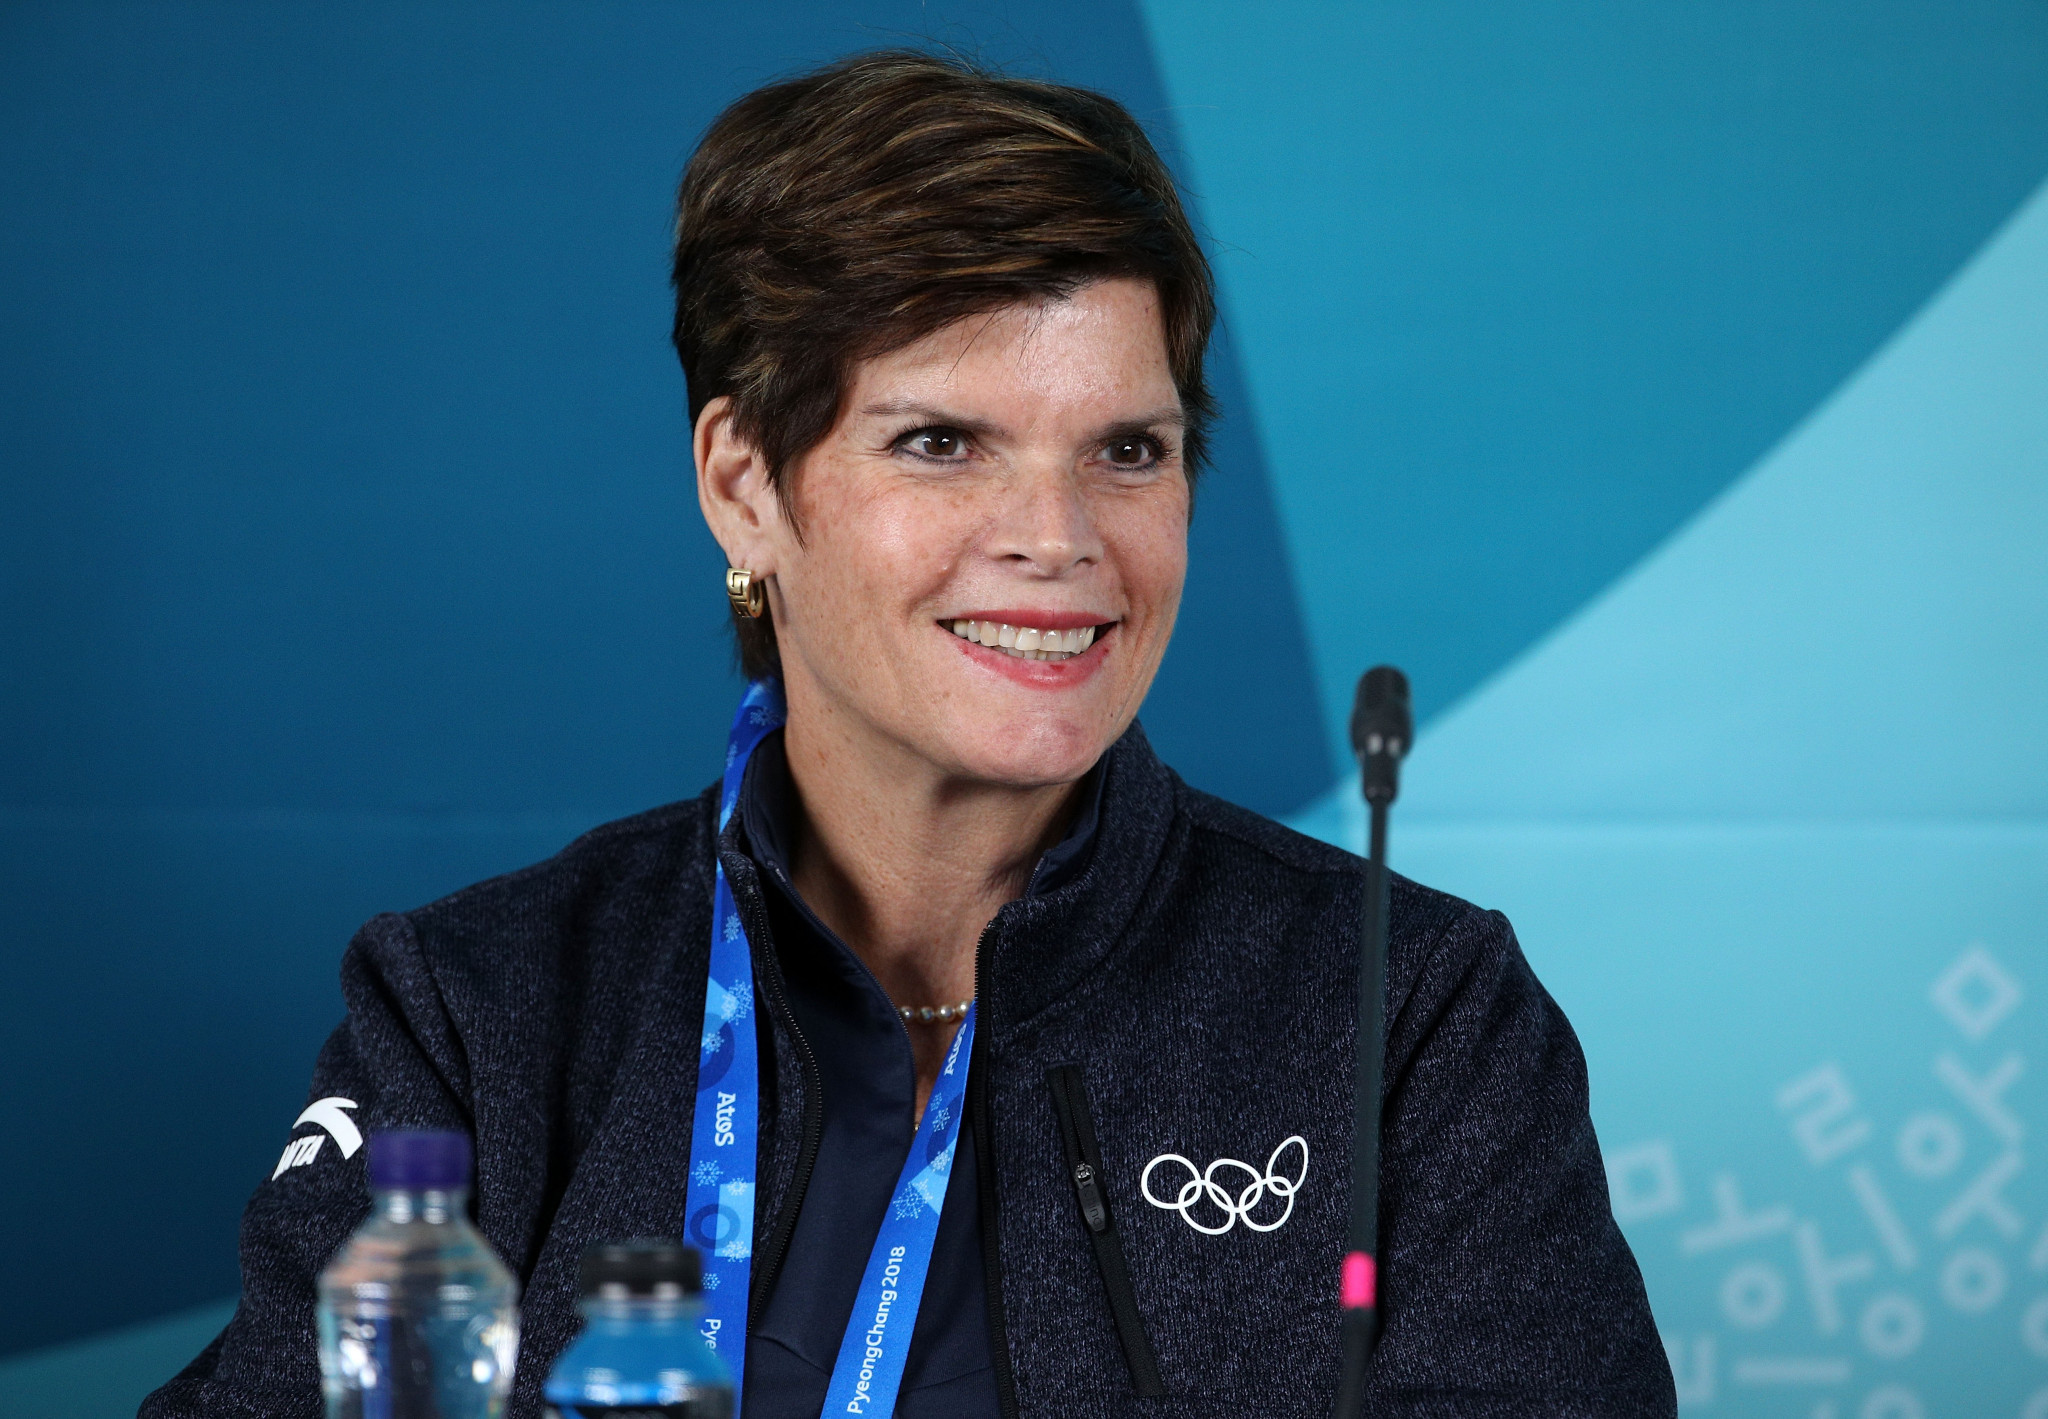 Hoevertsz says IOC Coordination Commission has "great optimism" for Los Angeles 2028